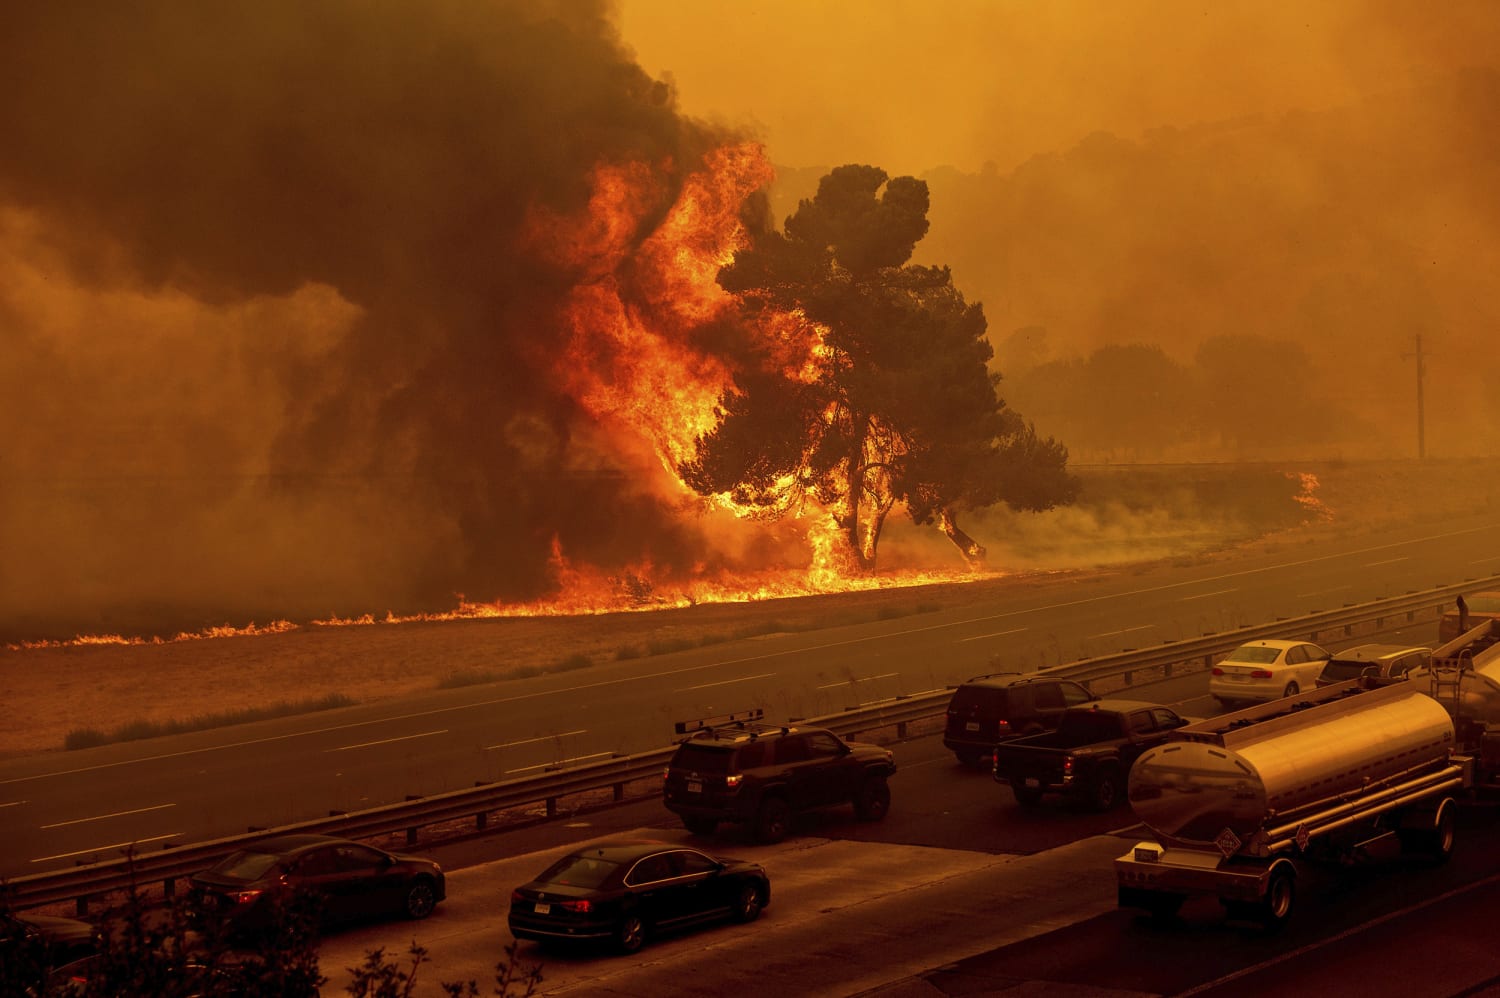 Firefighters are stretched thin as flames rage across California